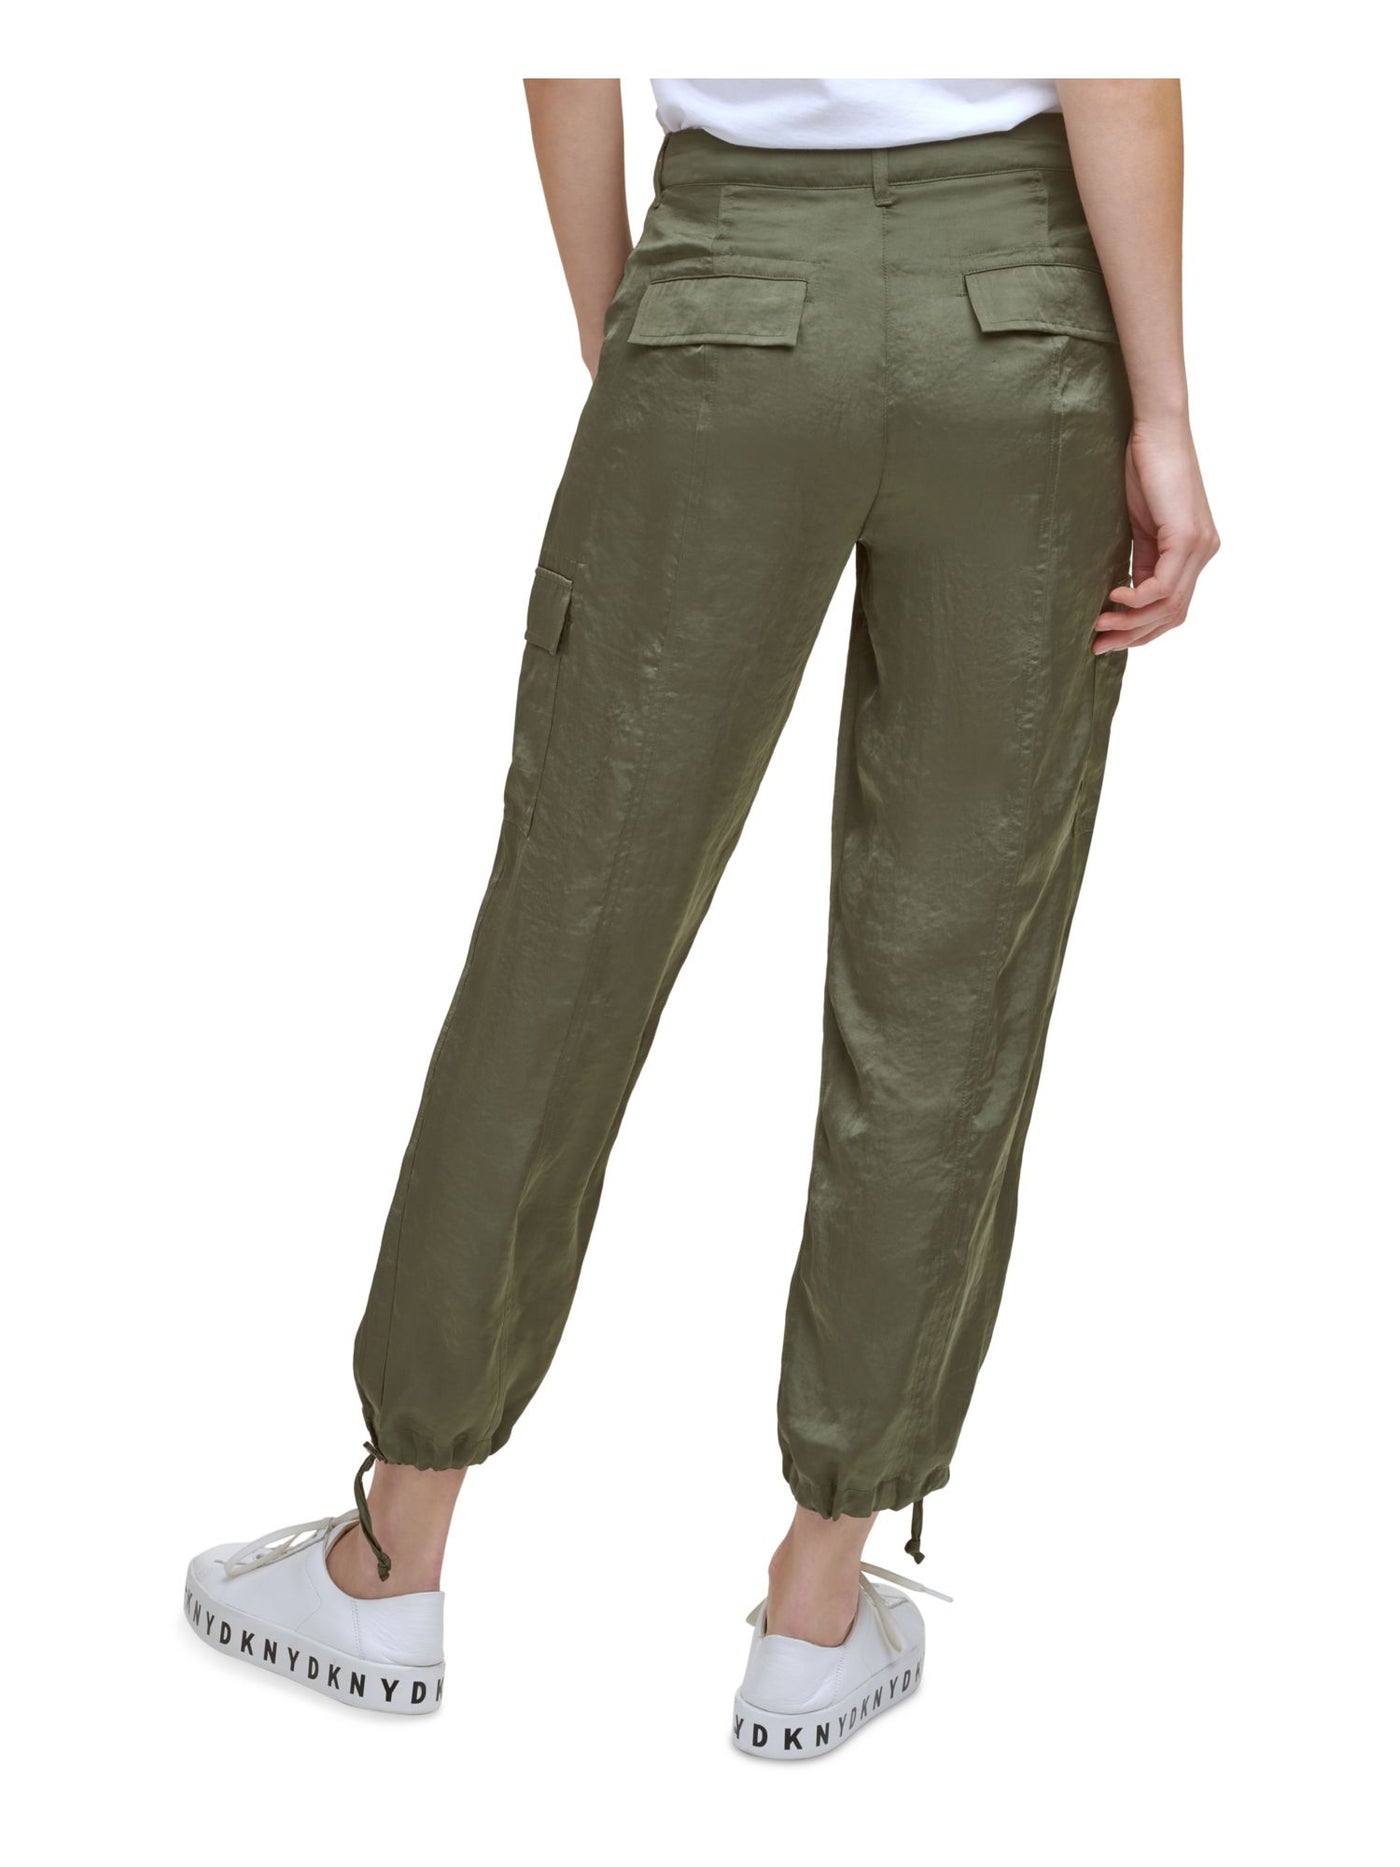 DKNY Womens Green Pocketed Zippered Drawstring Hems Front Rise Cargo Pants XS